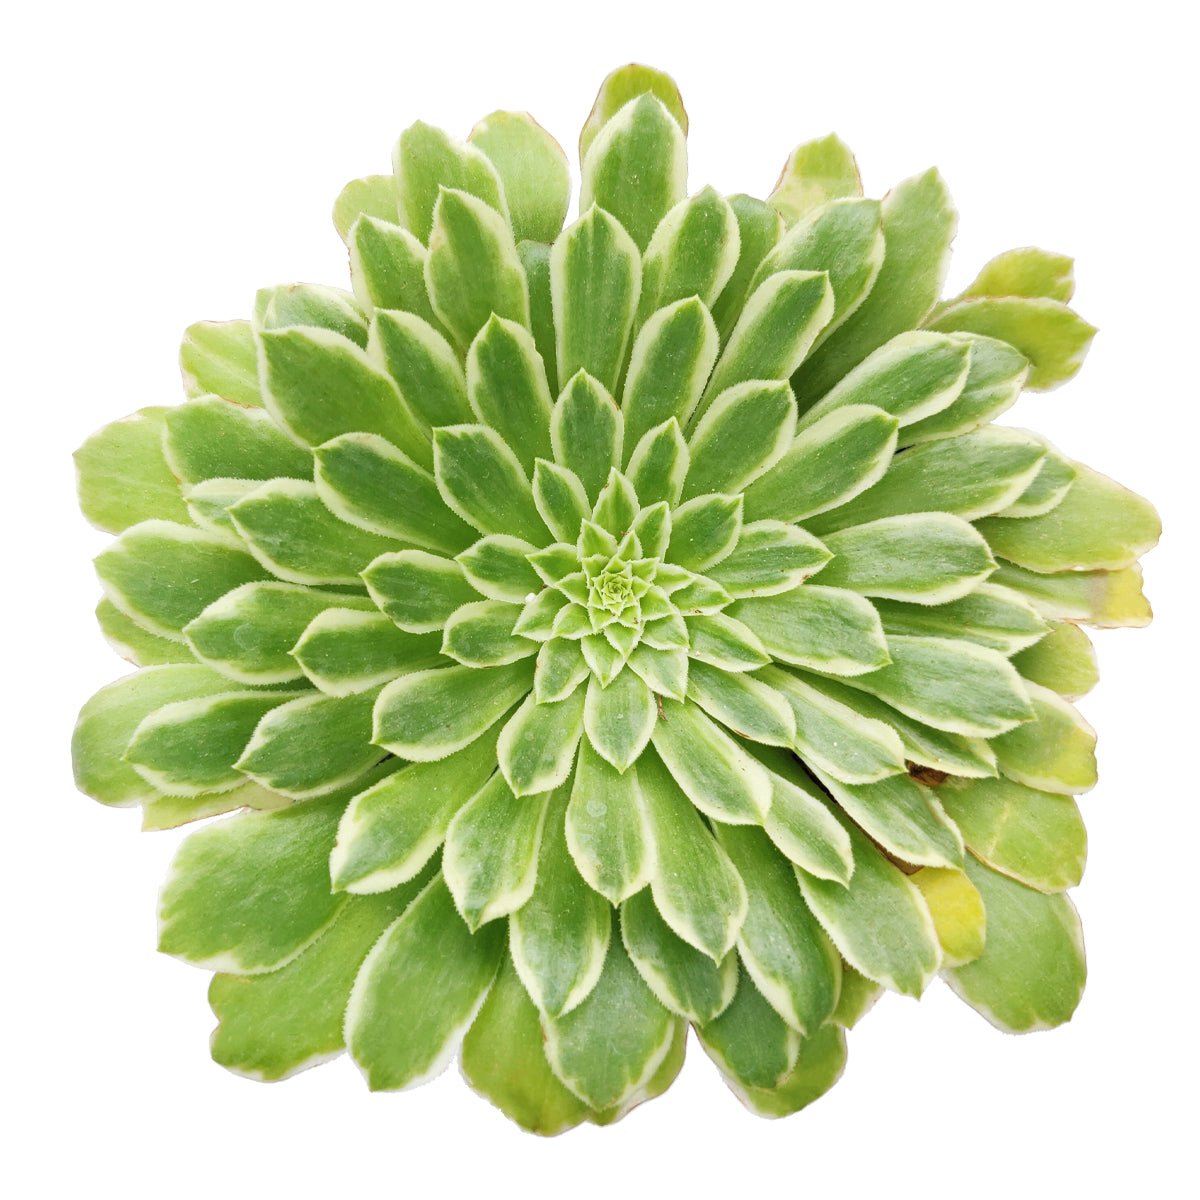 Aeonium Emerald Ice Bright Green Rosette Succulent for sale, How to grow and care for Aeonium Succulent Plant, Aeonium Emerald Ice Propagation, Premium Succulent Gift Box for any occasion, Aeonium Emerald Ice Succulent with care guide, Succulent & Cactus for sale